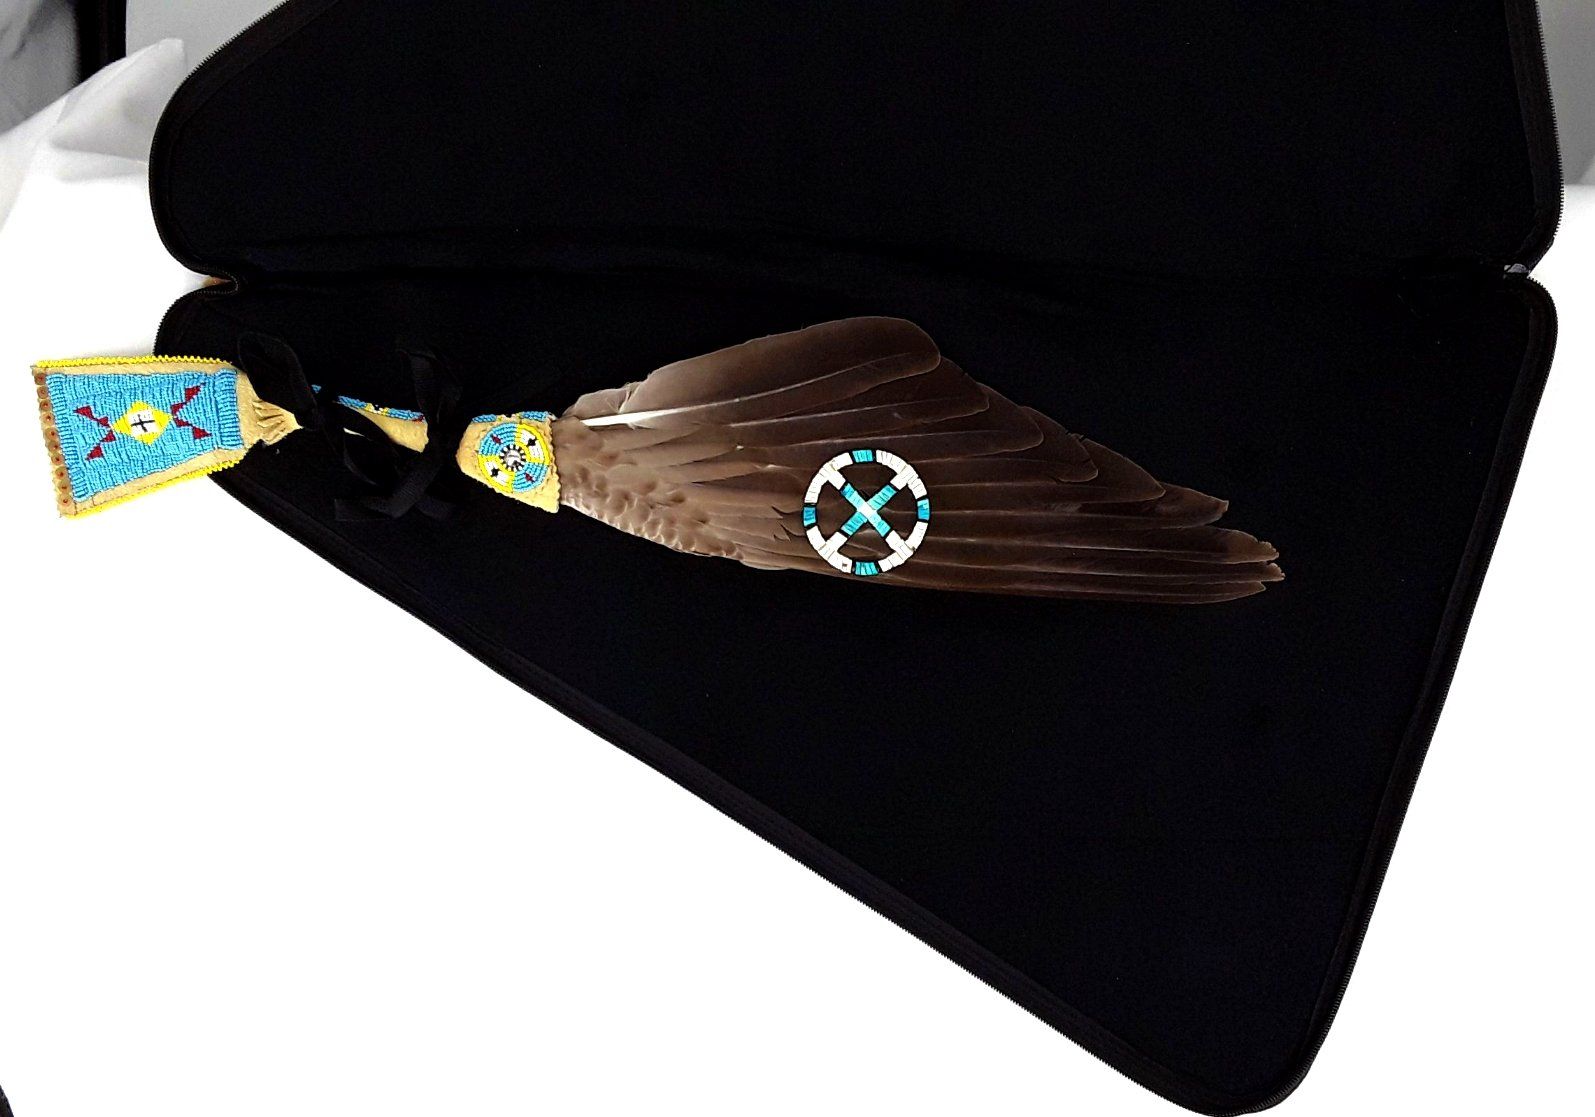 27 Inch Fan Case - Grandmother's Stories Turquoise